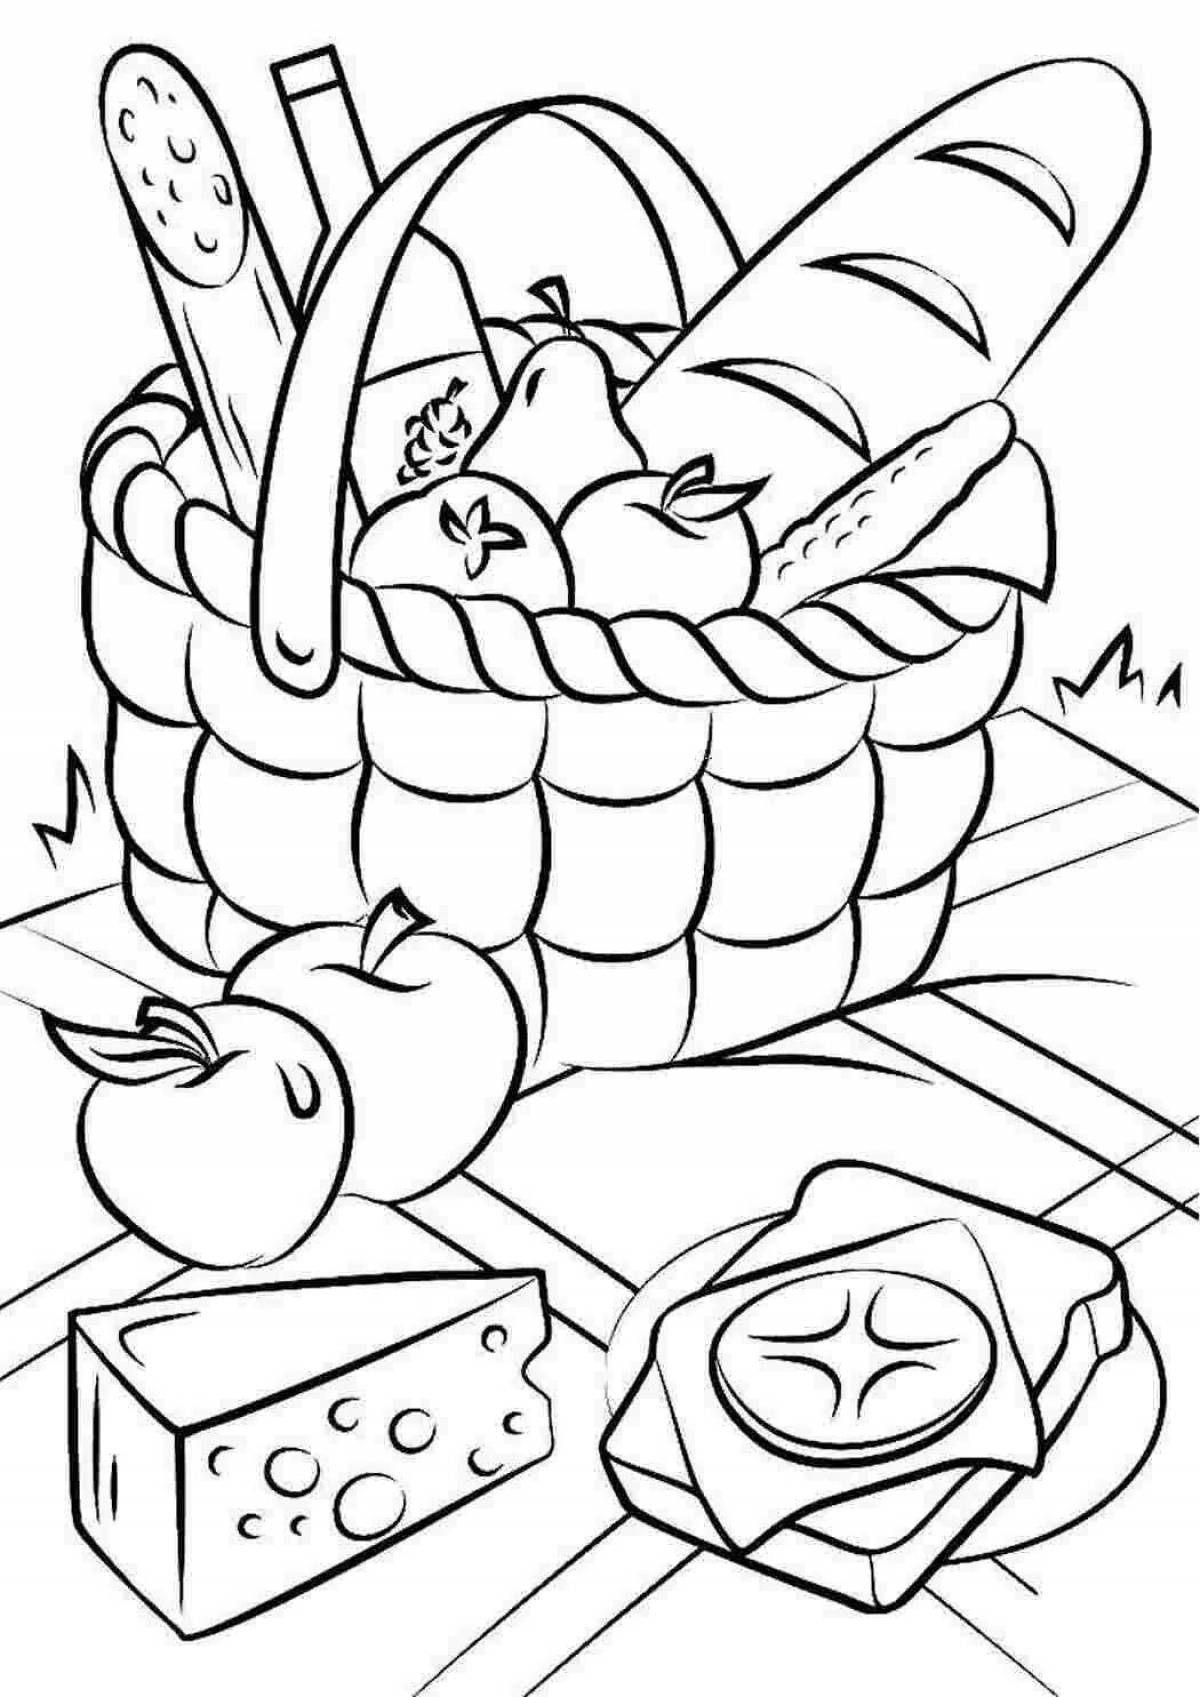 Colorful food coloring page for kids